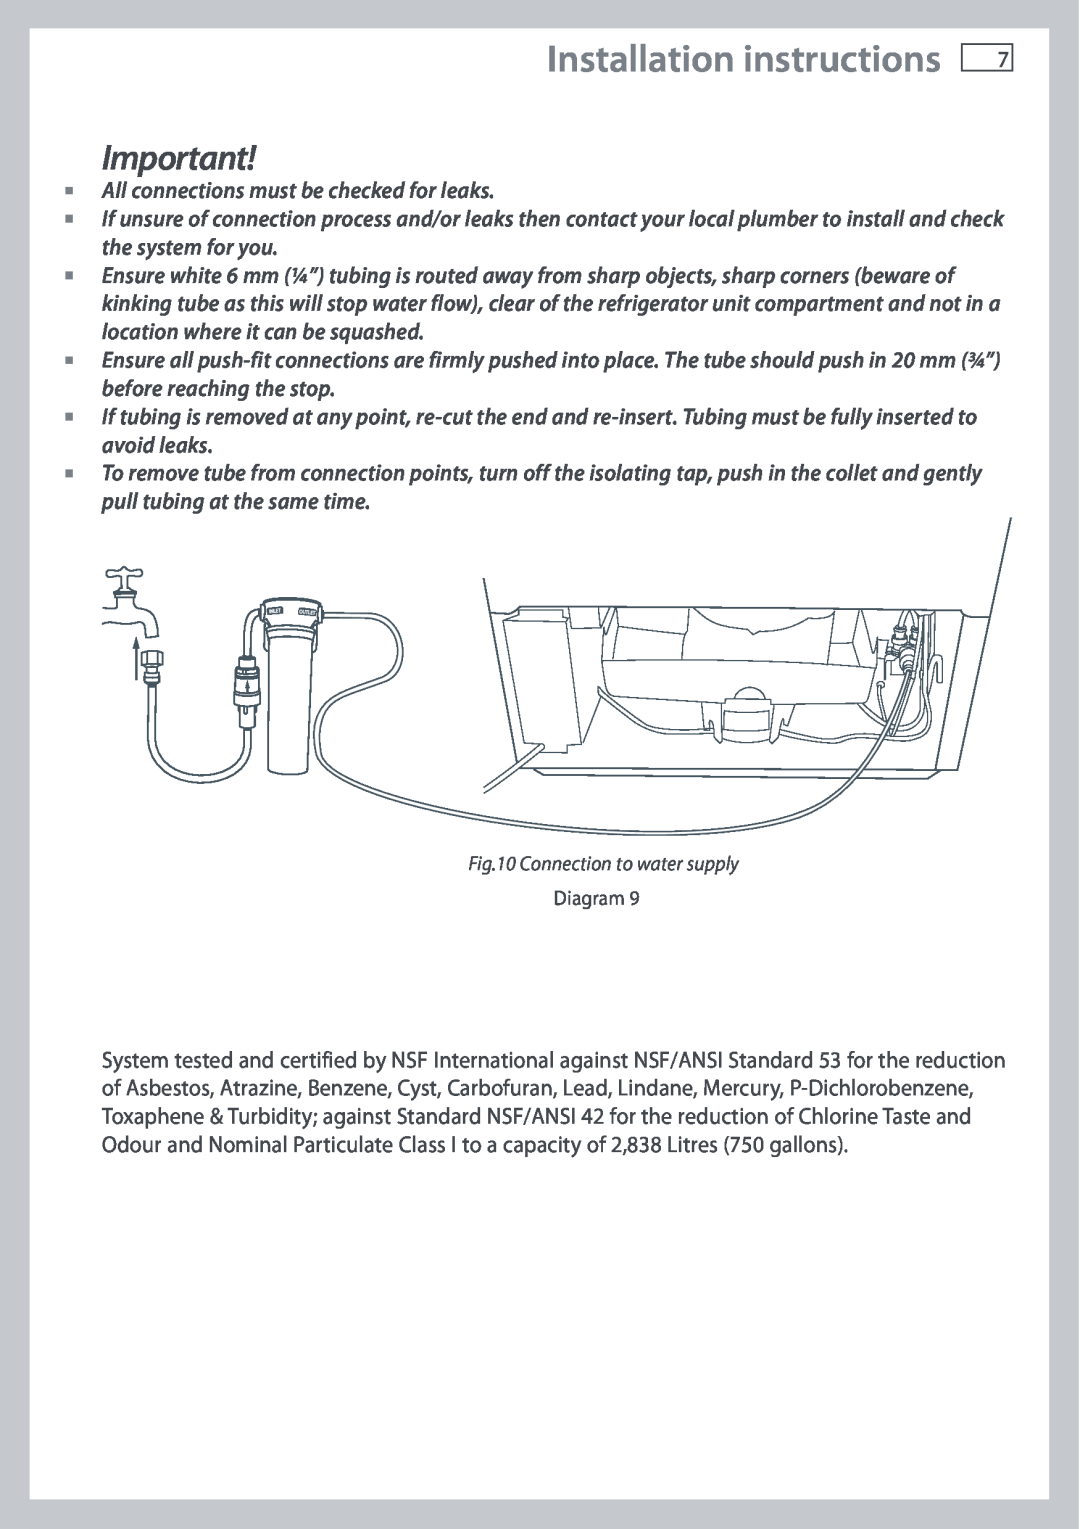 Fisher & Paykel E402B, E442B installation instructions Installation instructions, All connections must be checked for leaks 